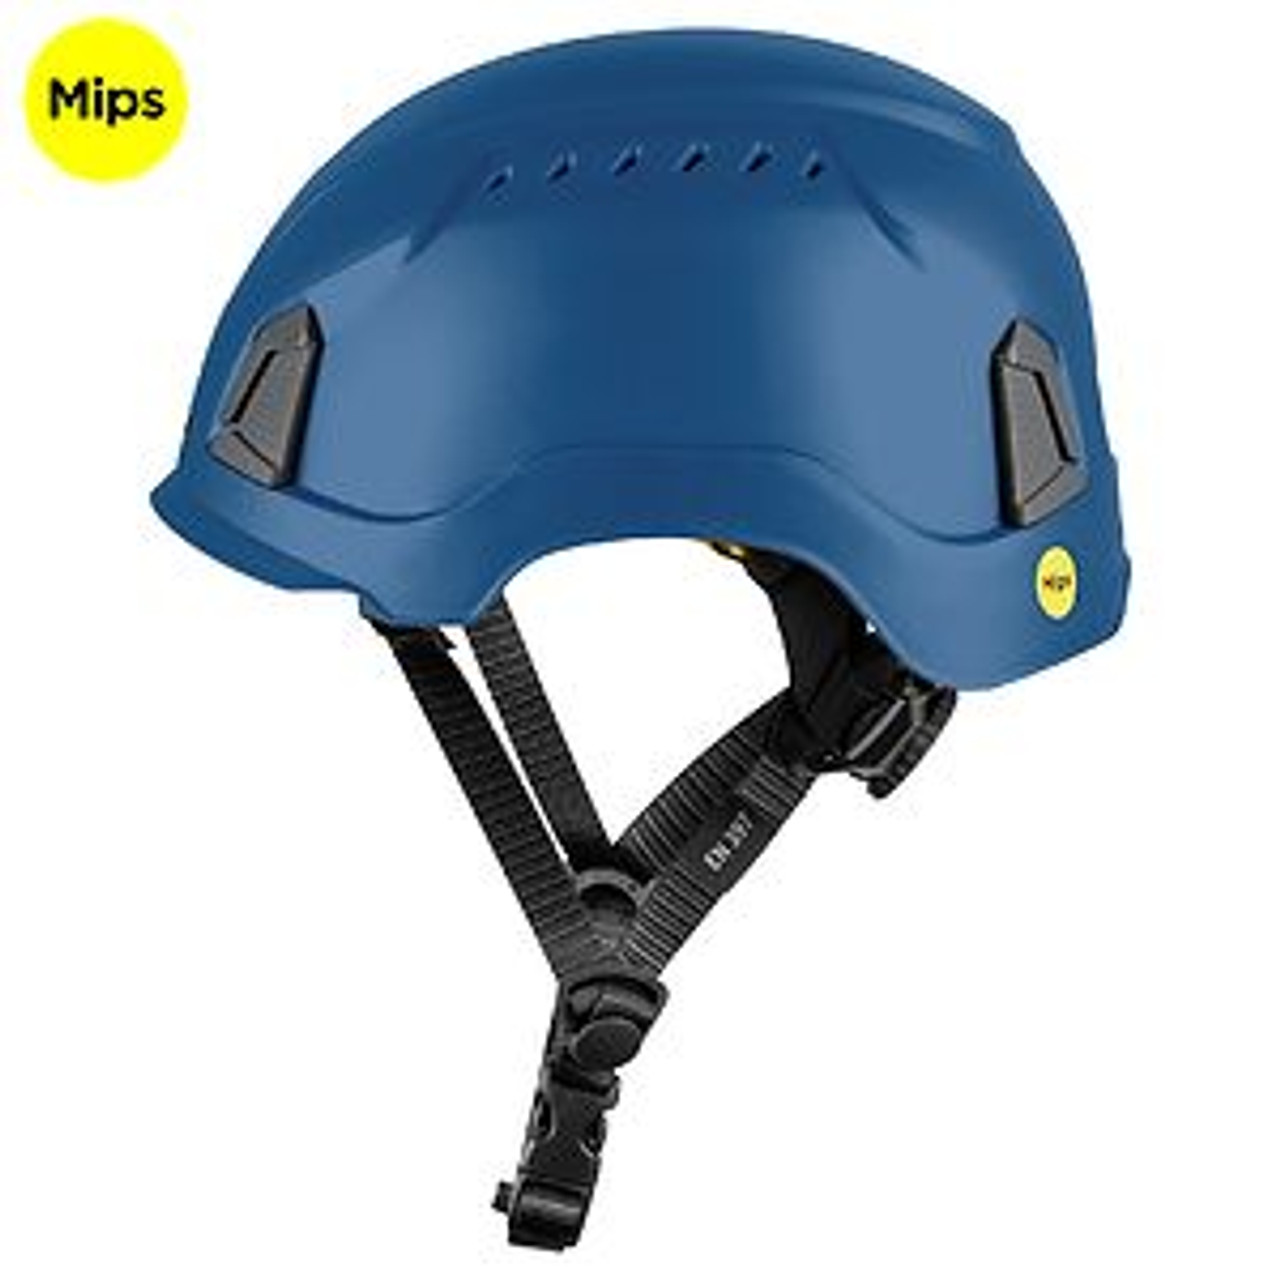 ZEKLER Helmet | ZONE Blue Technical Safety Helmet  with MIPS for Rope Access, Electricians and Construction